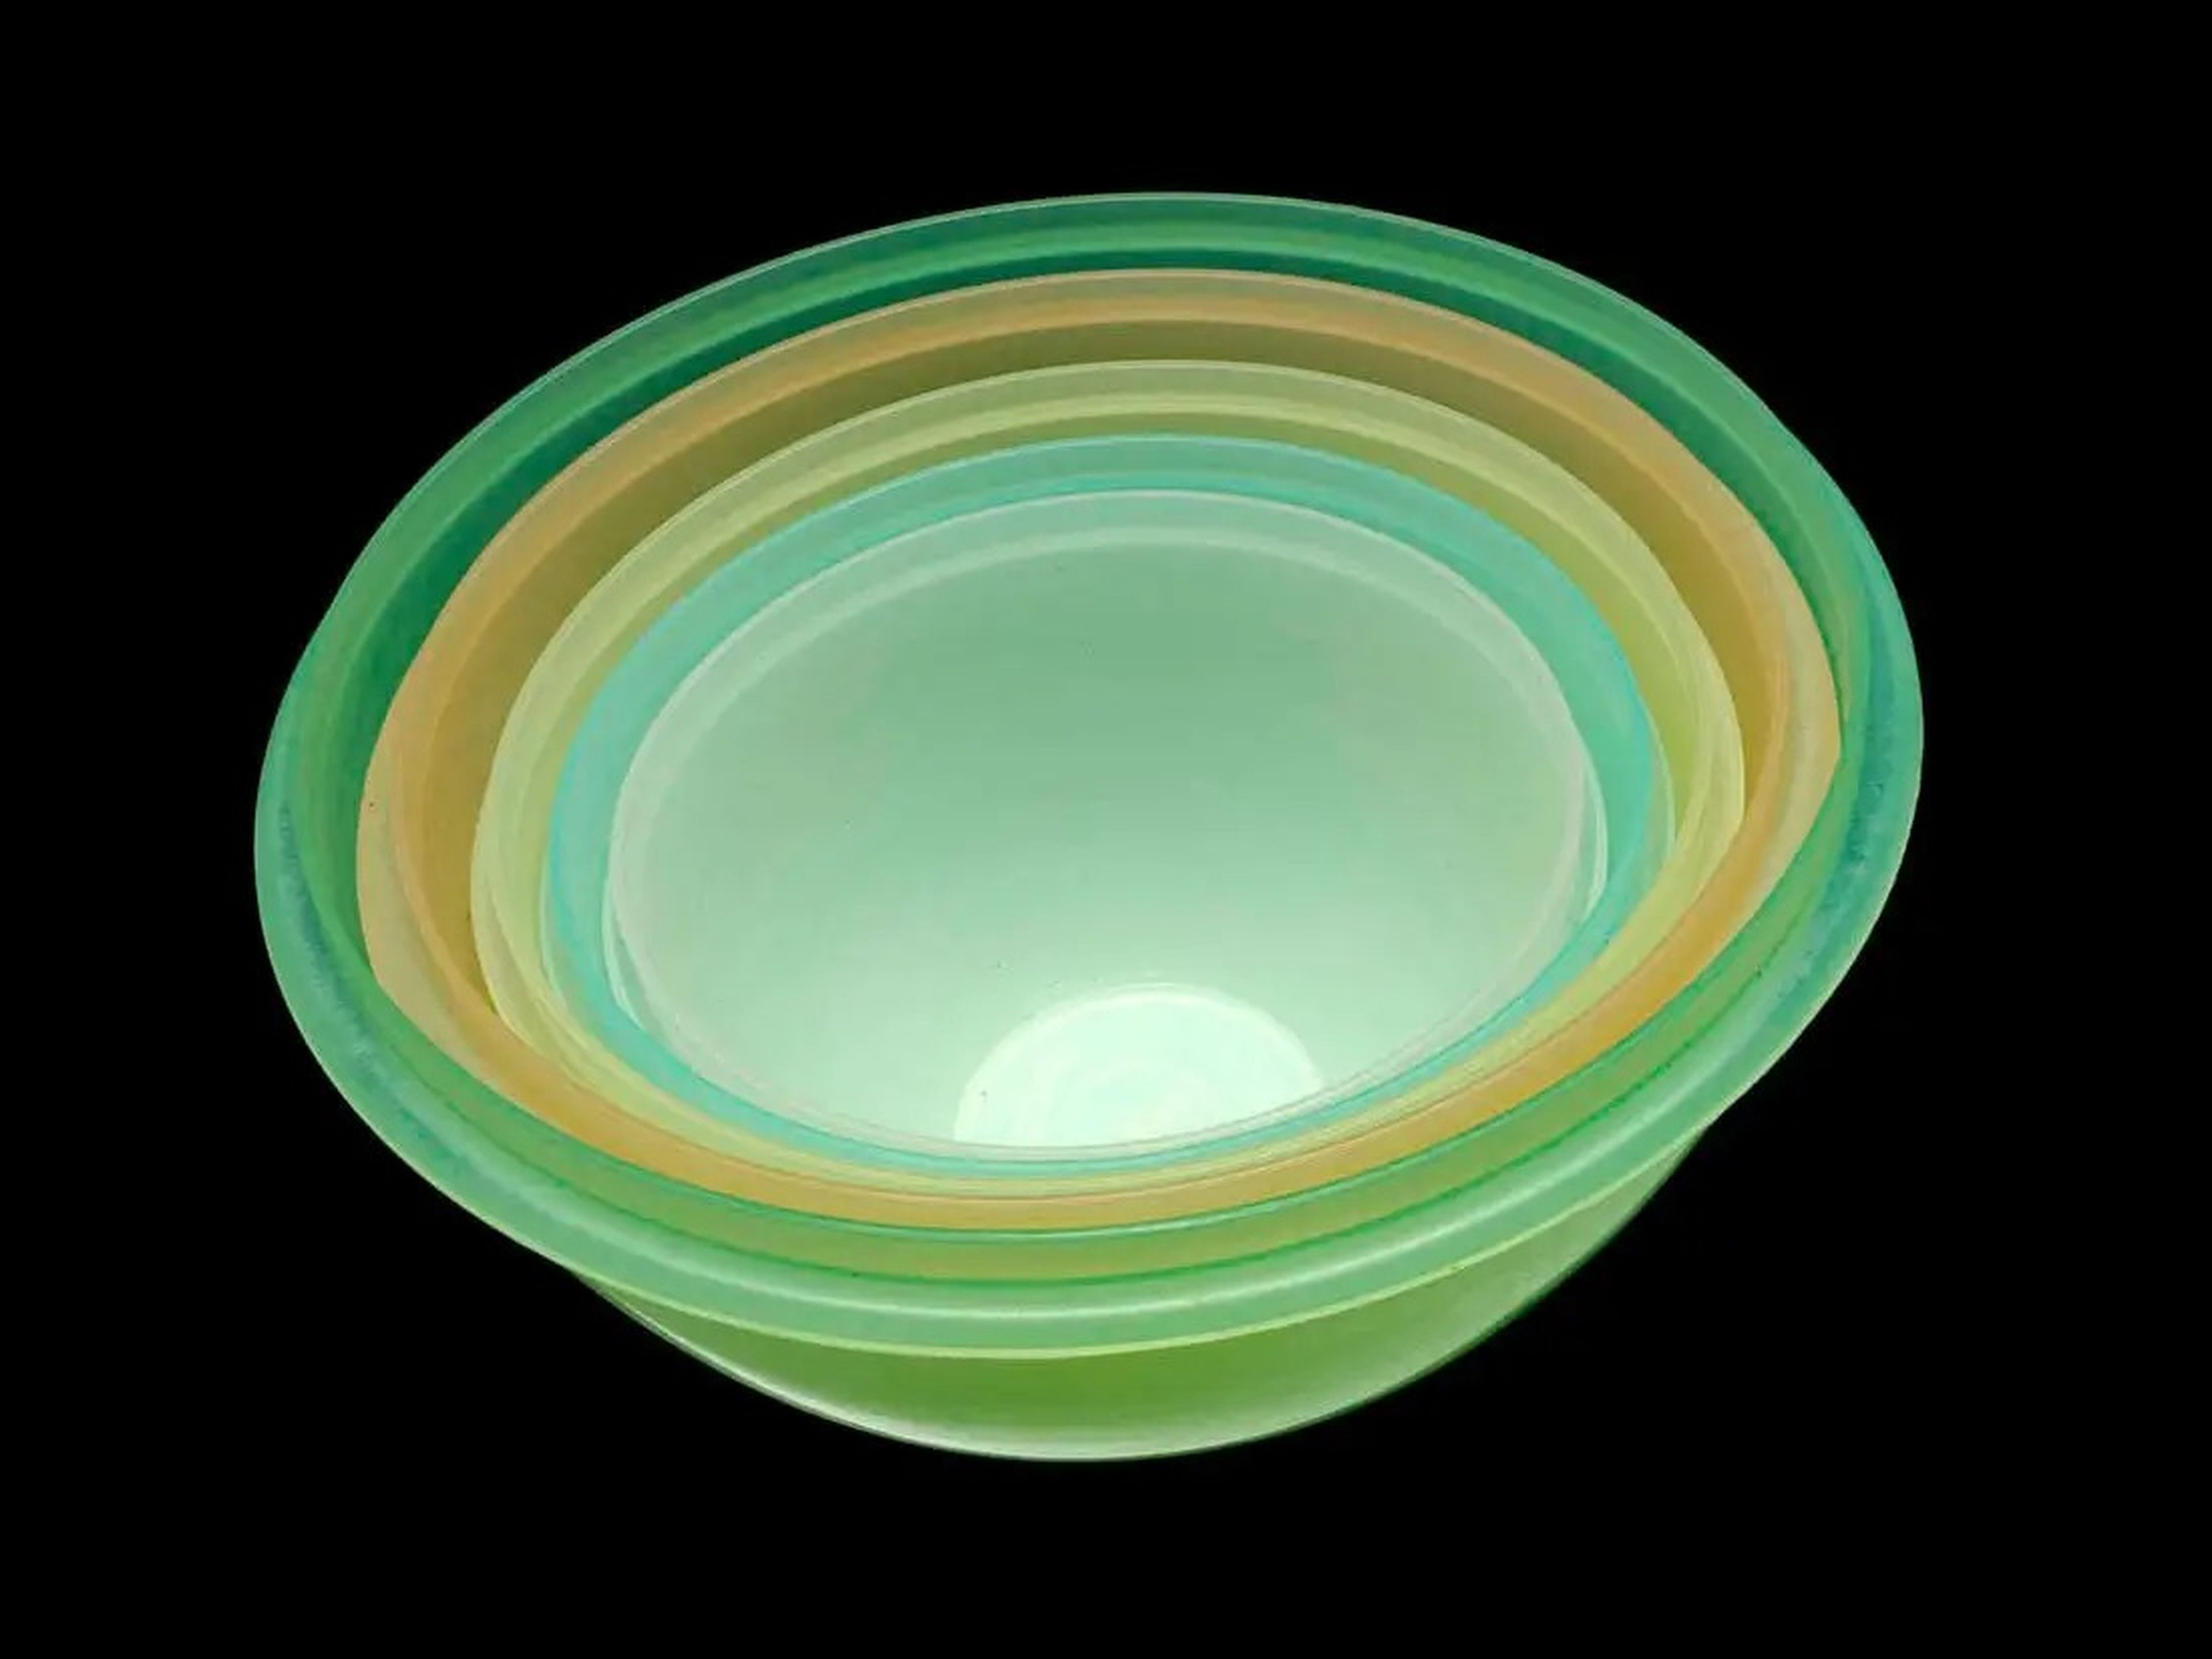 A set of Wonderlier Tupperware, four bowls in multiple sizes and colors, against a black background.